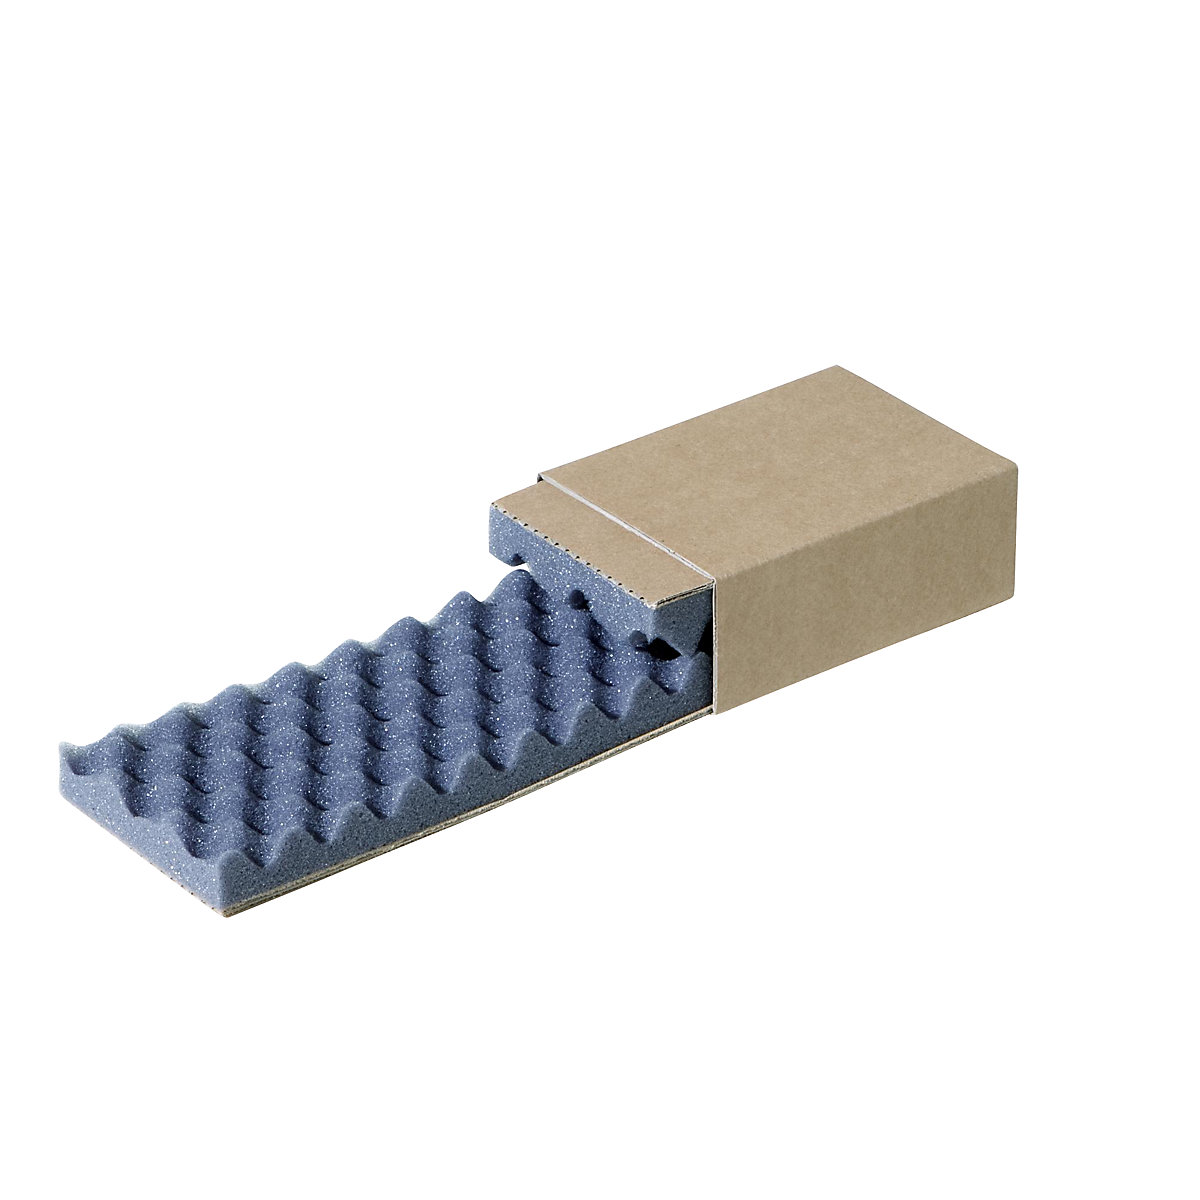 Slide boxes, internal part FEFCO 0907, external part FEFCO 0503, padded, internal dimensions 150 x 100 x 50 mm, pack of 100-2